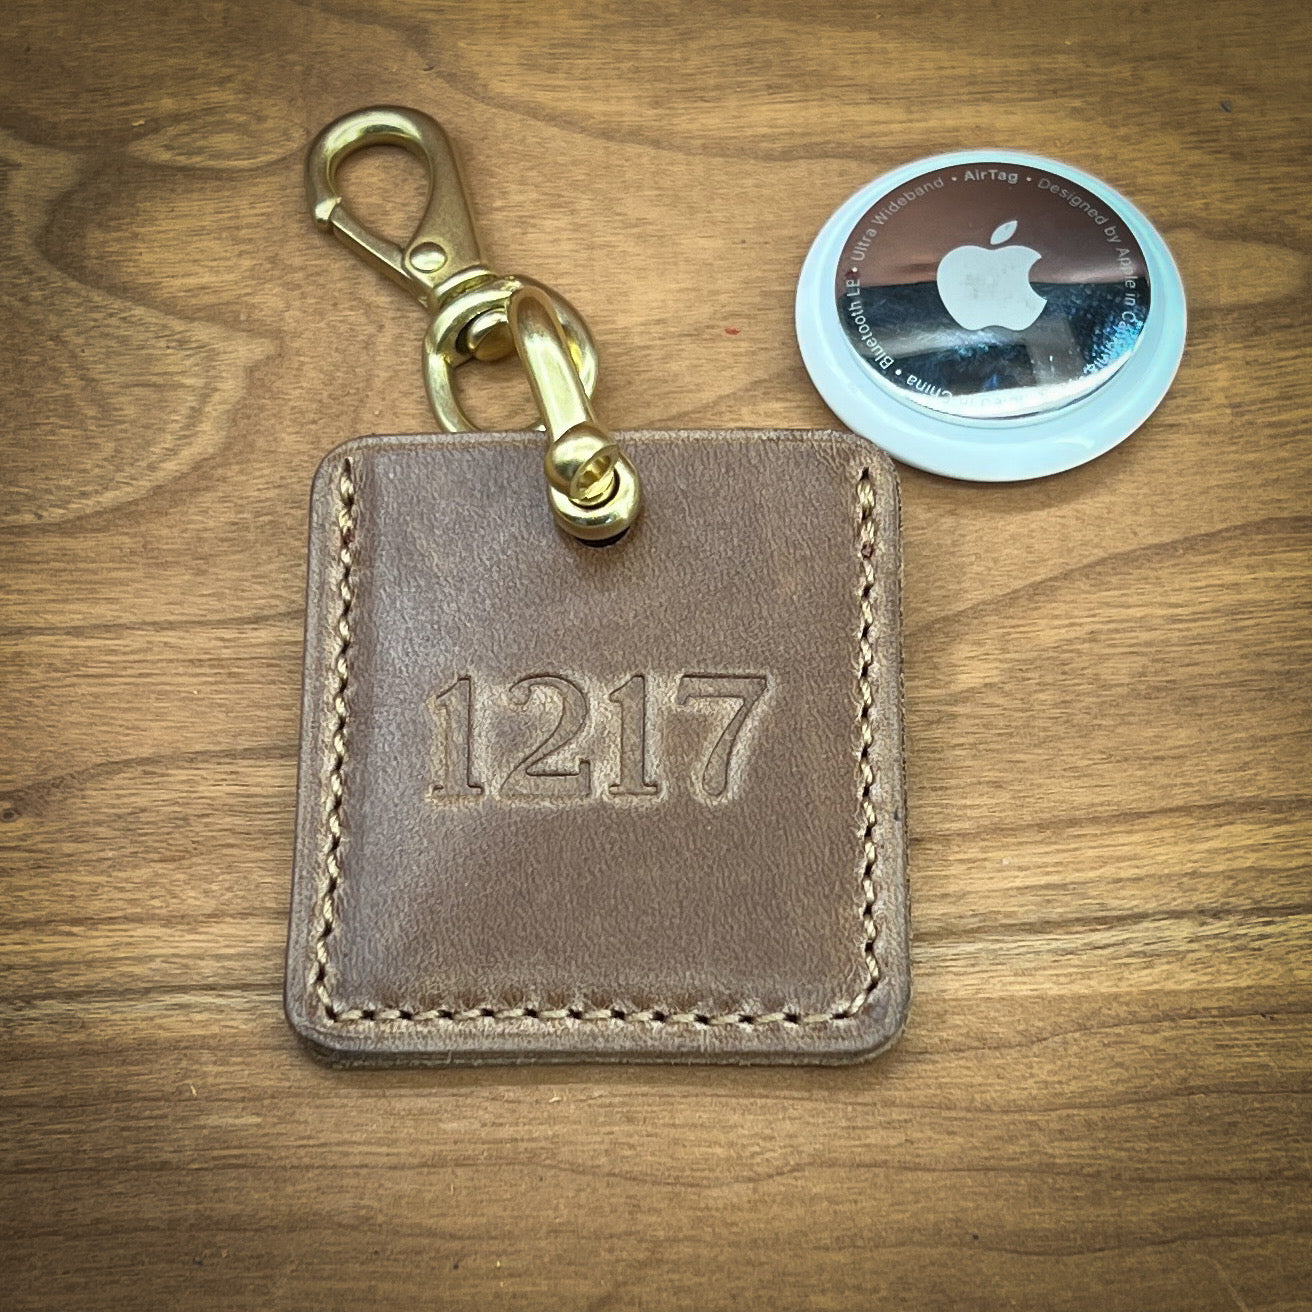 Customizable Airtag Holder in Horween Leather